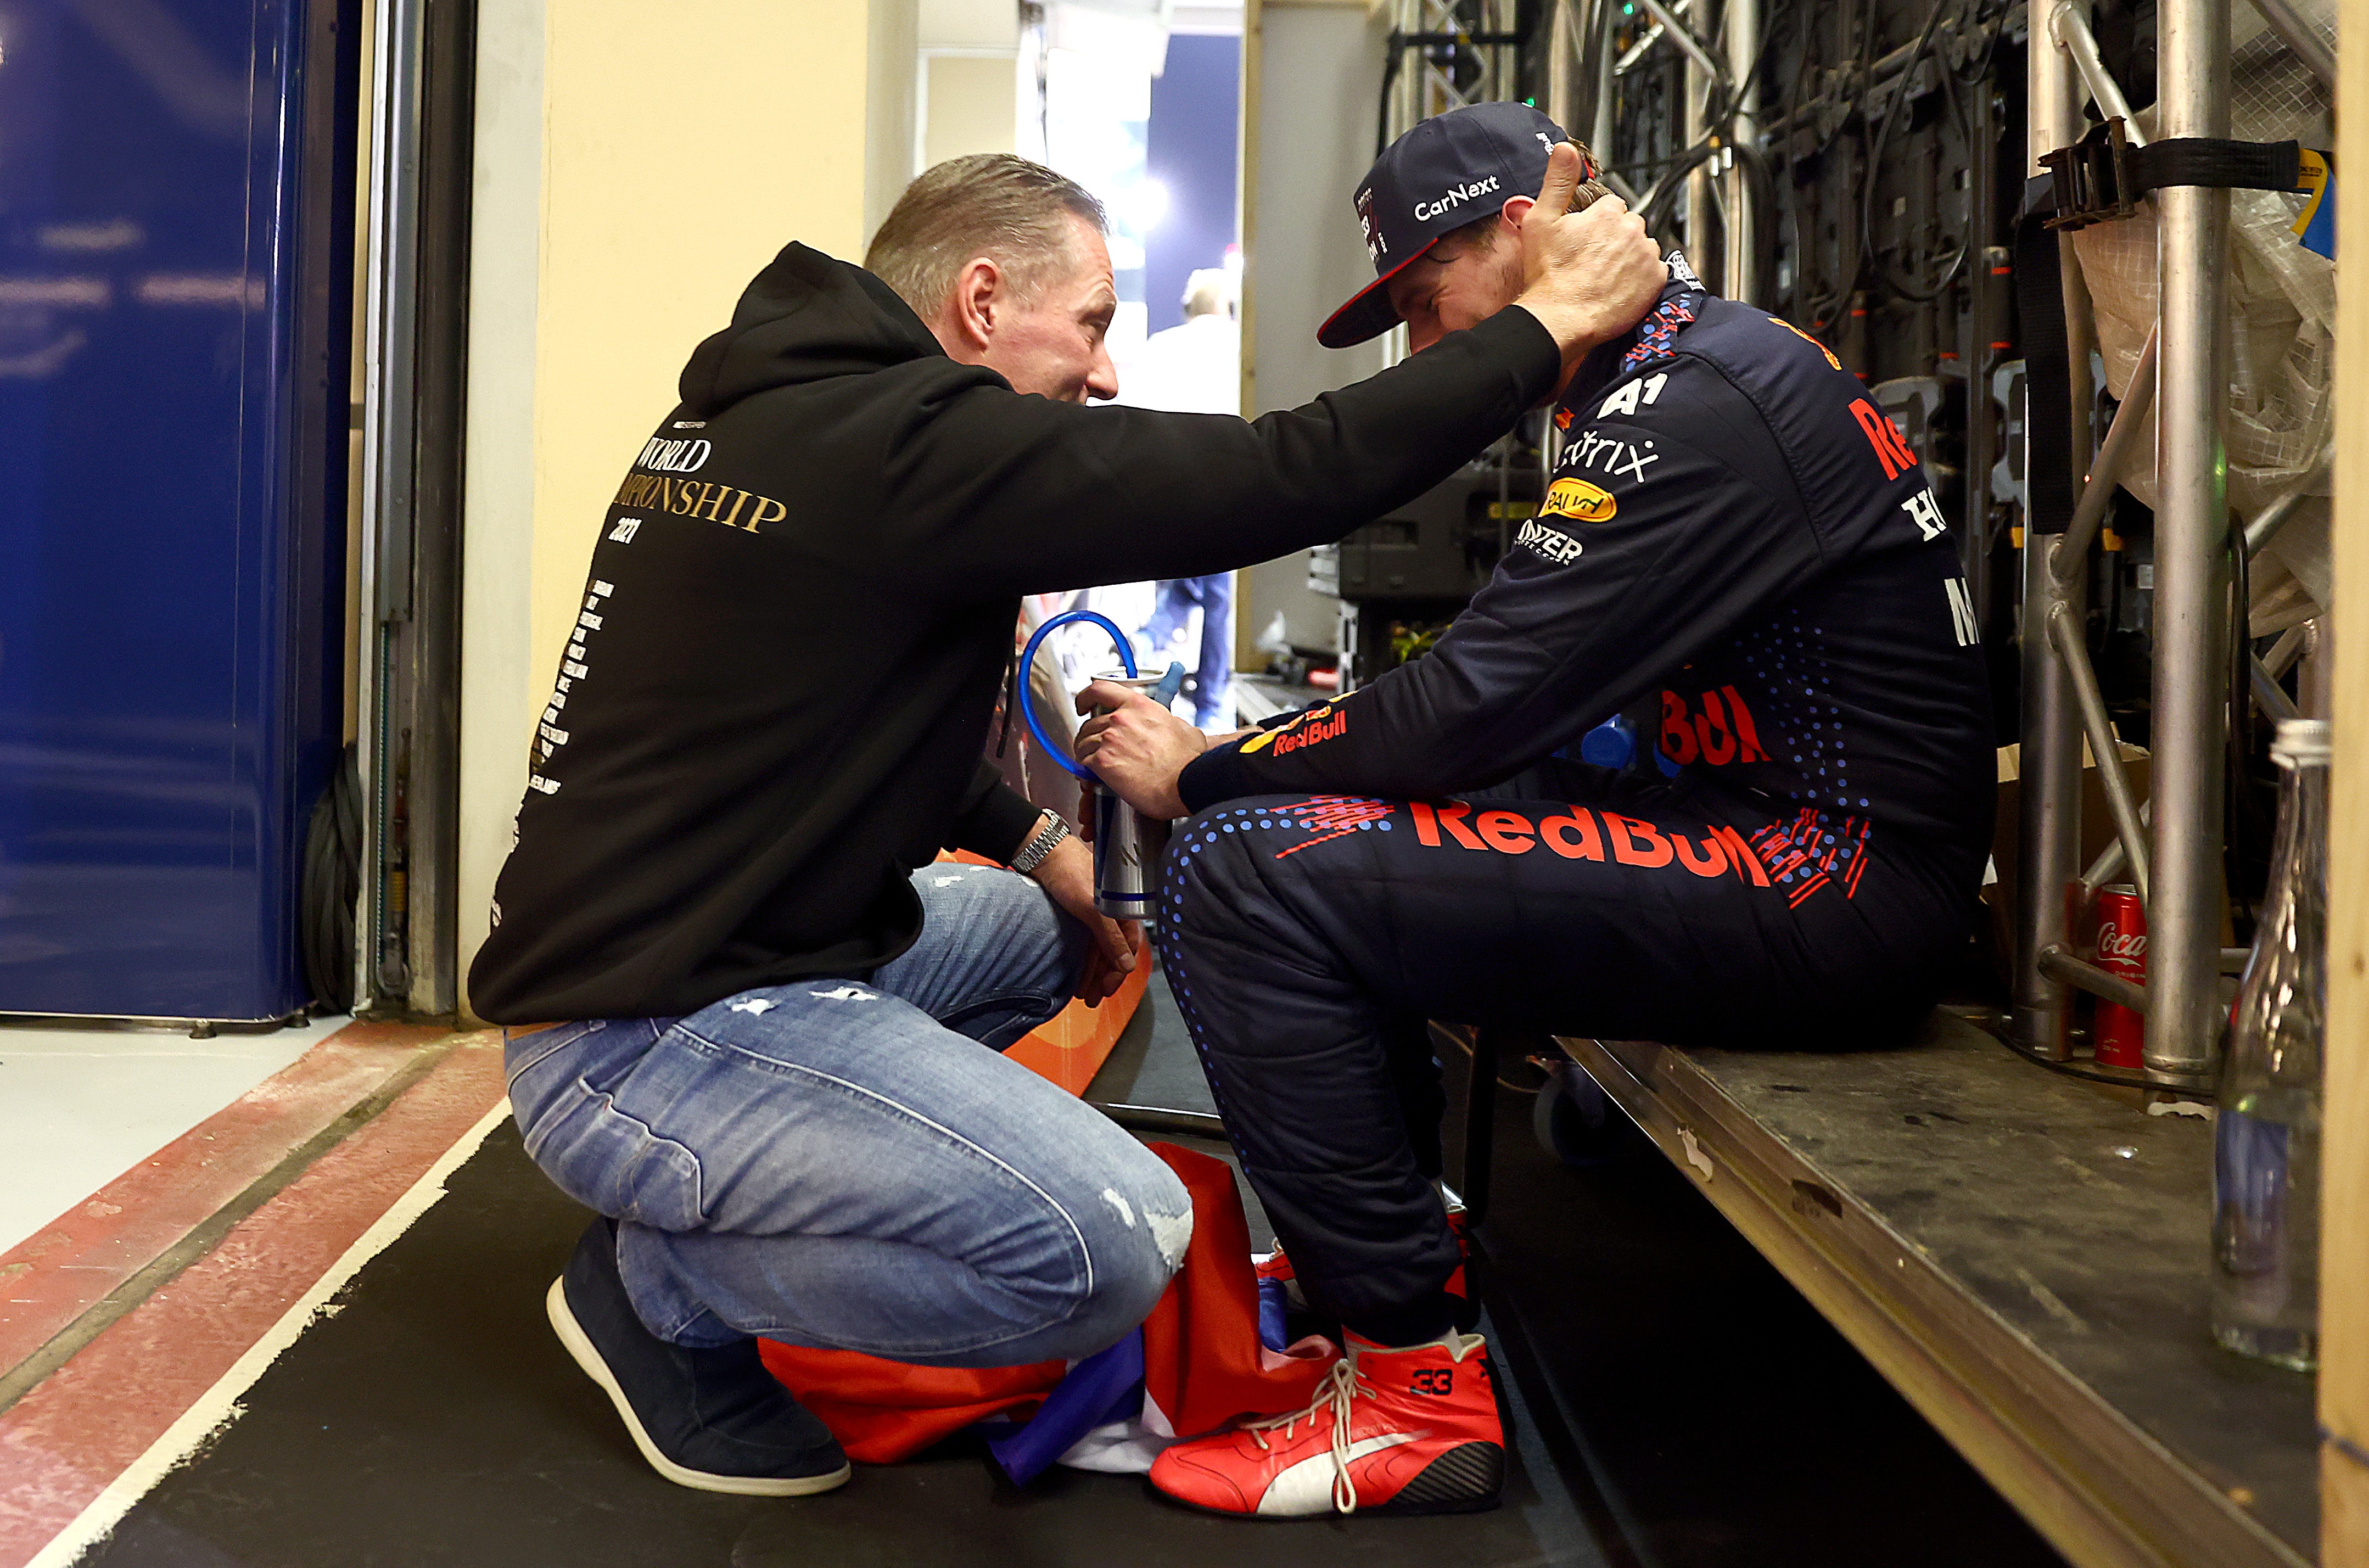 A dream fulfilled for Verstappen and his father, Jos